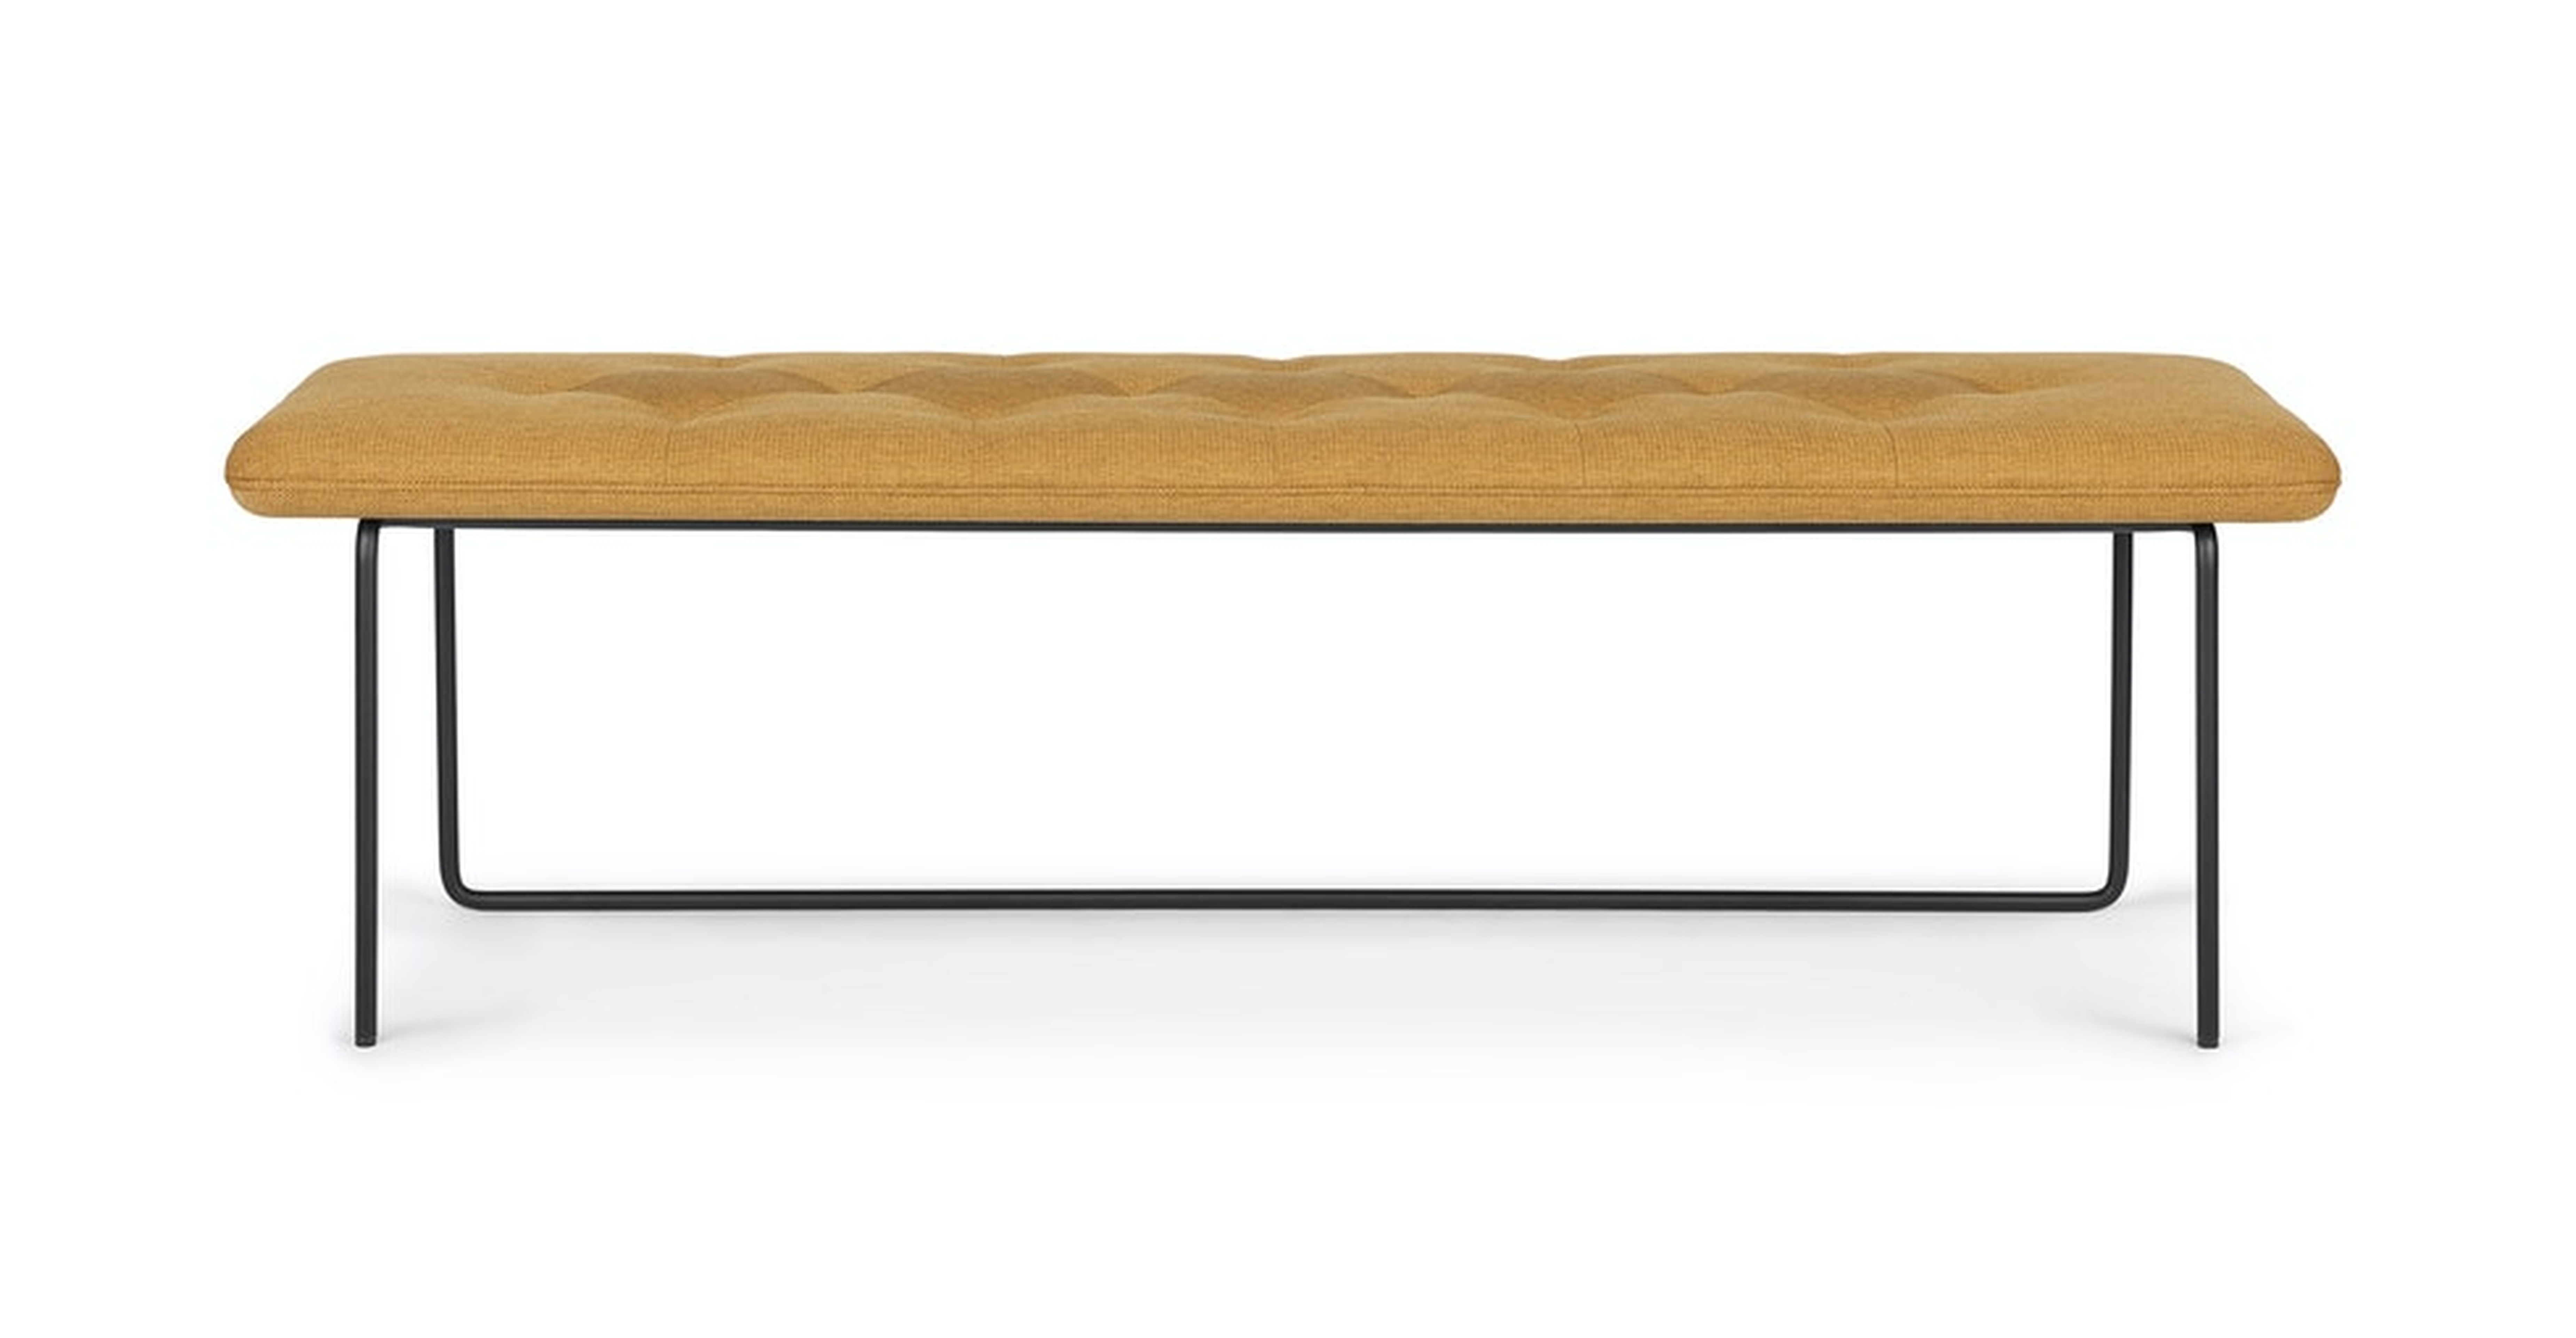 Level Nectar Yellow 61" Bench - Article